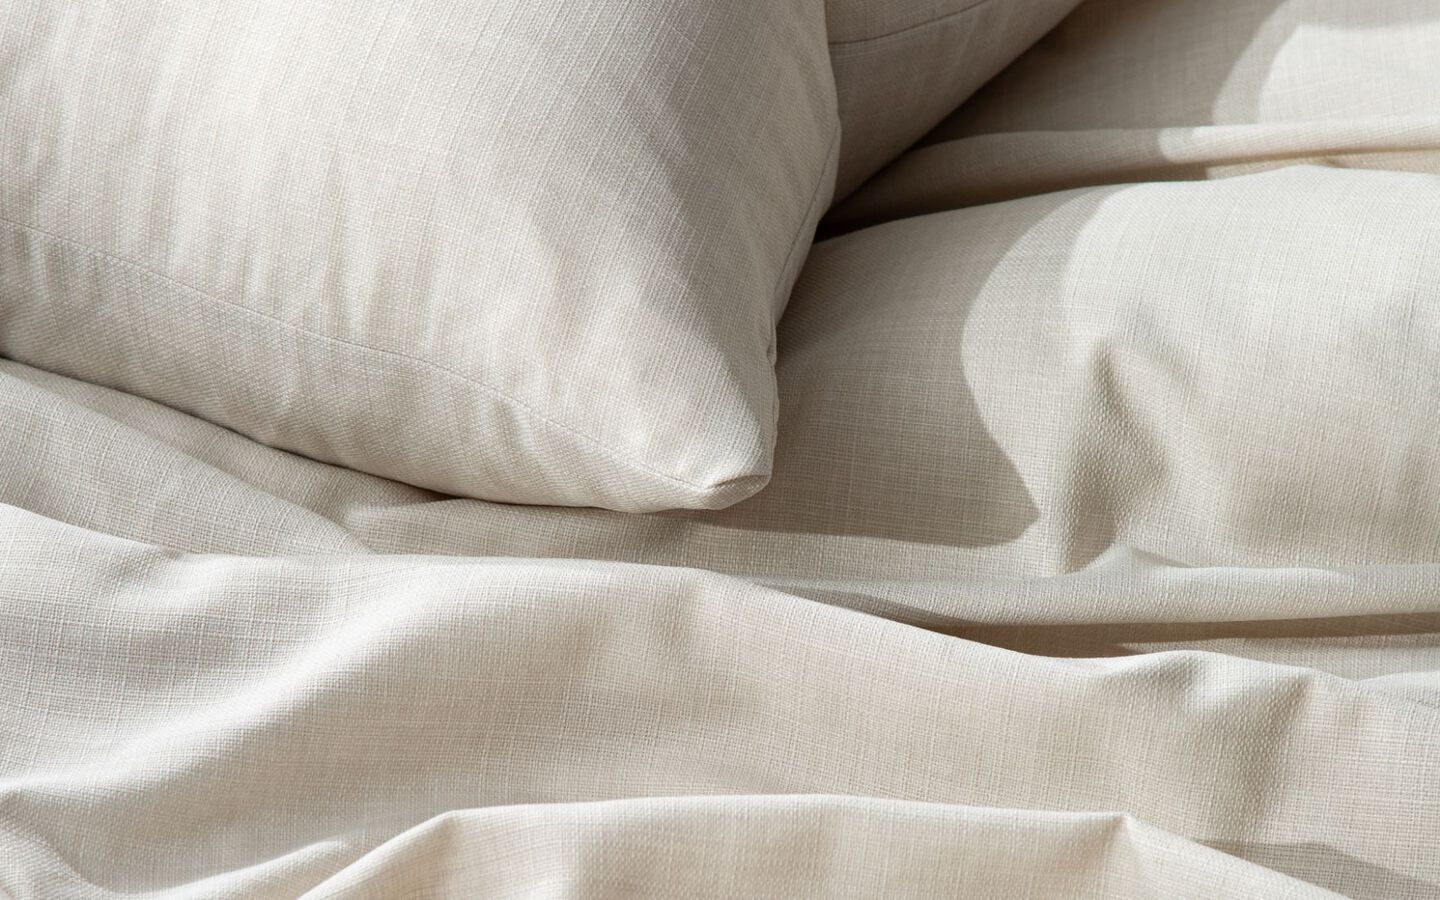 Closeup image of off-white linen bedding